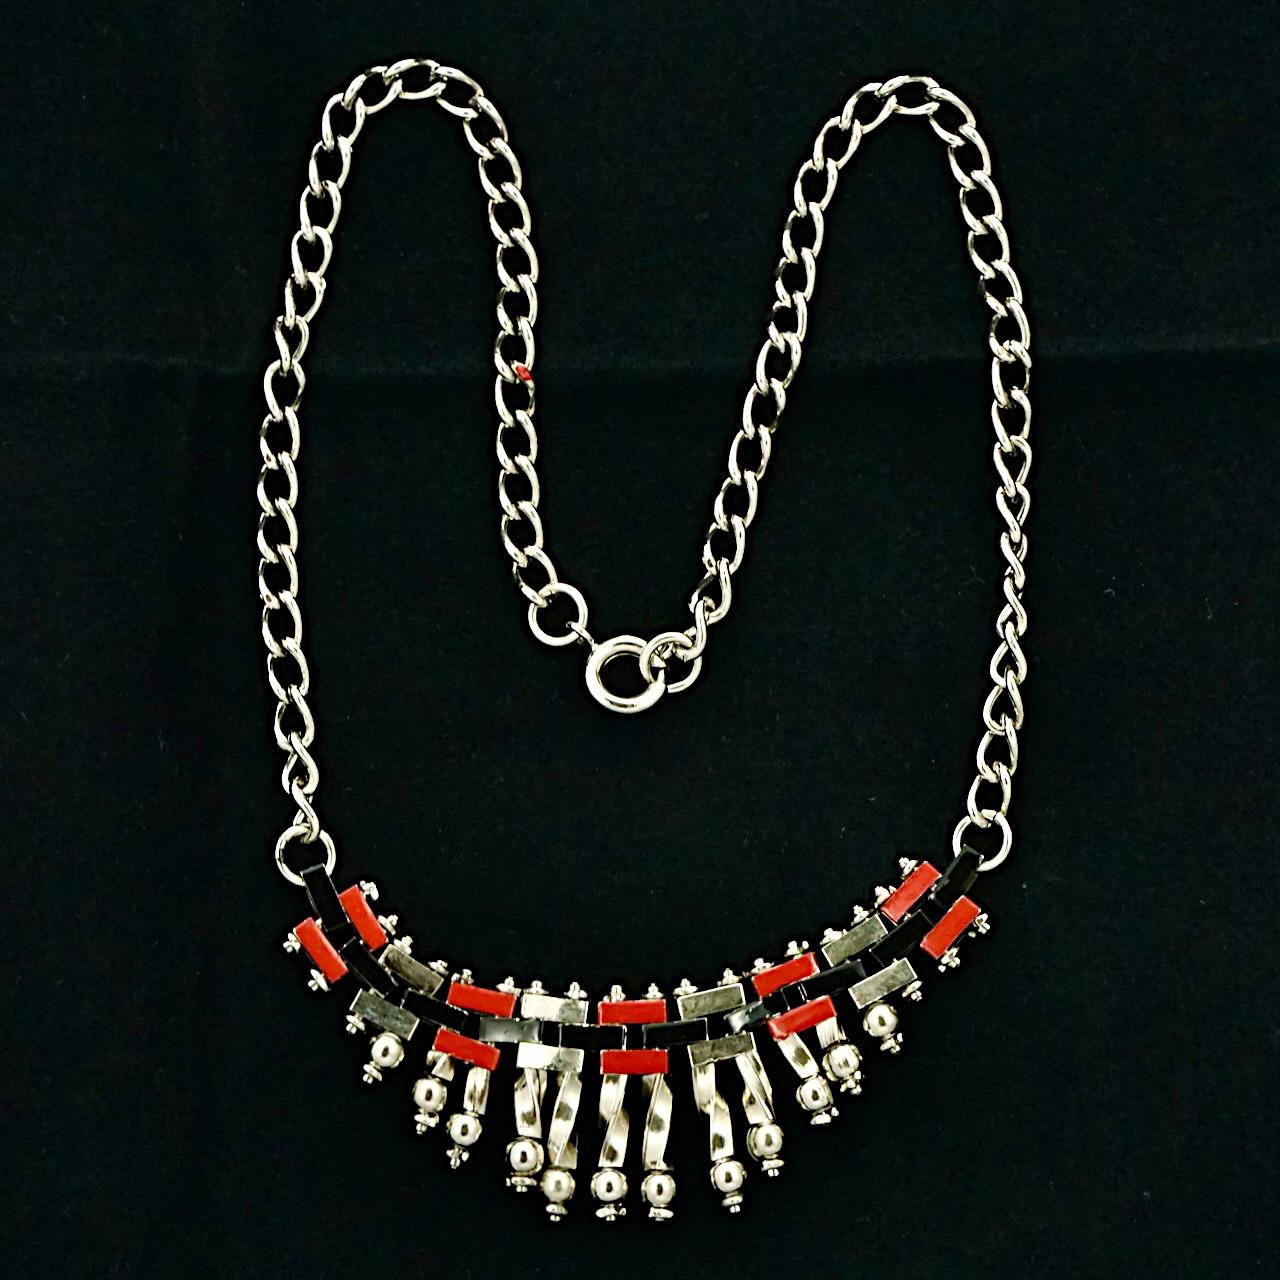 Jakob Bengel Art Deco Chrome Plated Red and Black Enamel Necklace circa 1930s For Sale 2